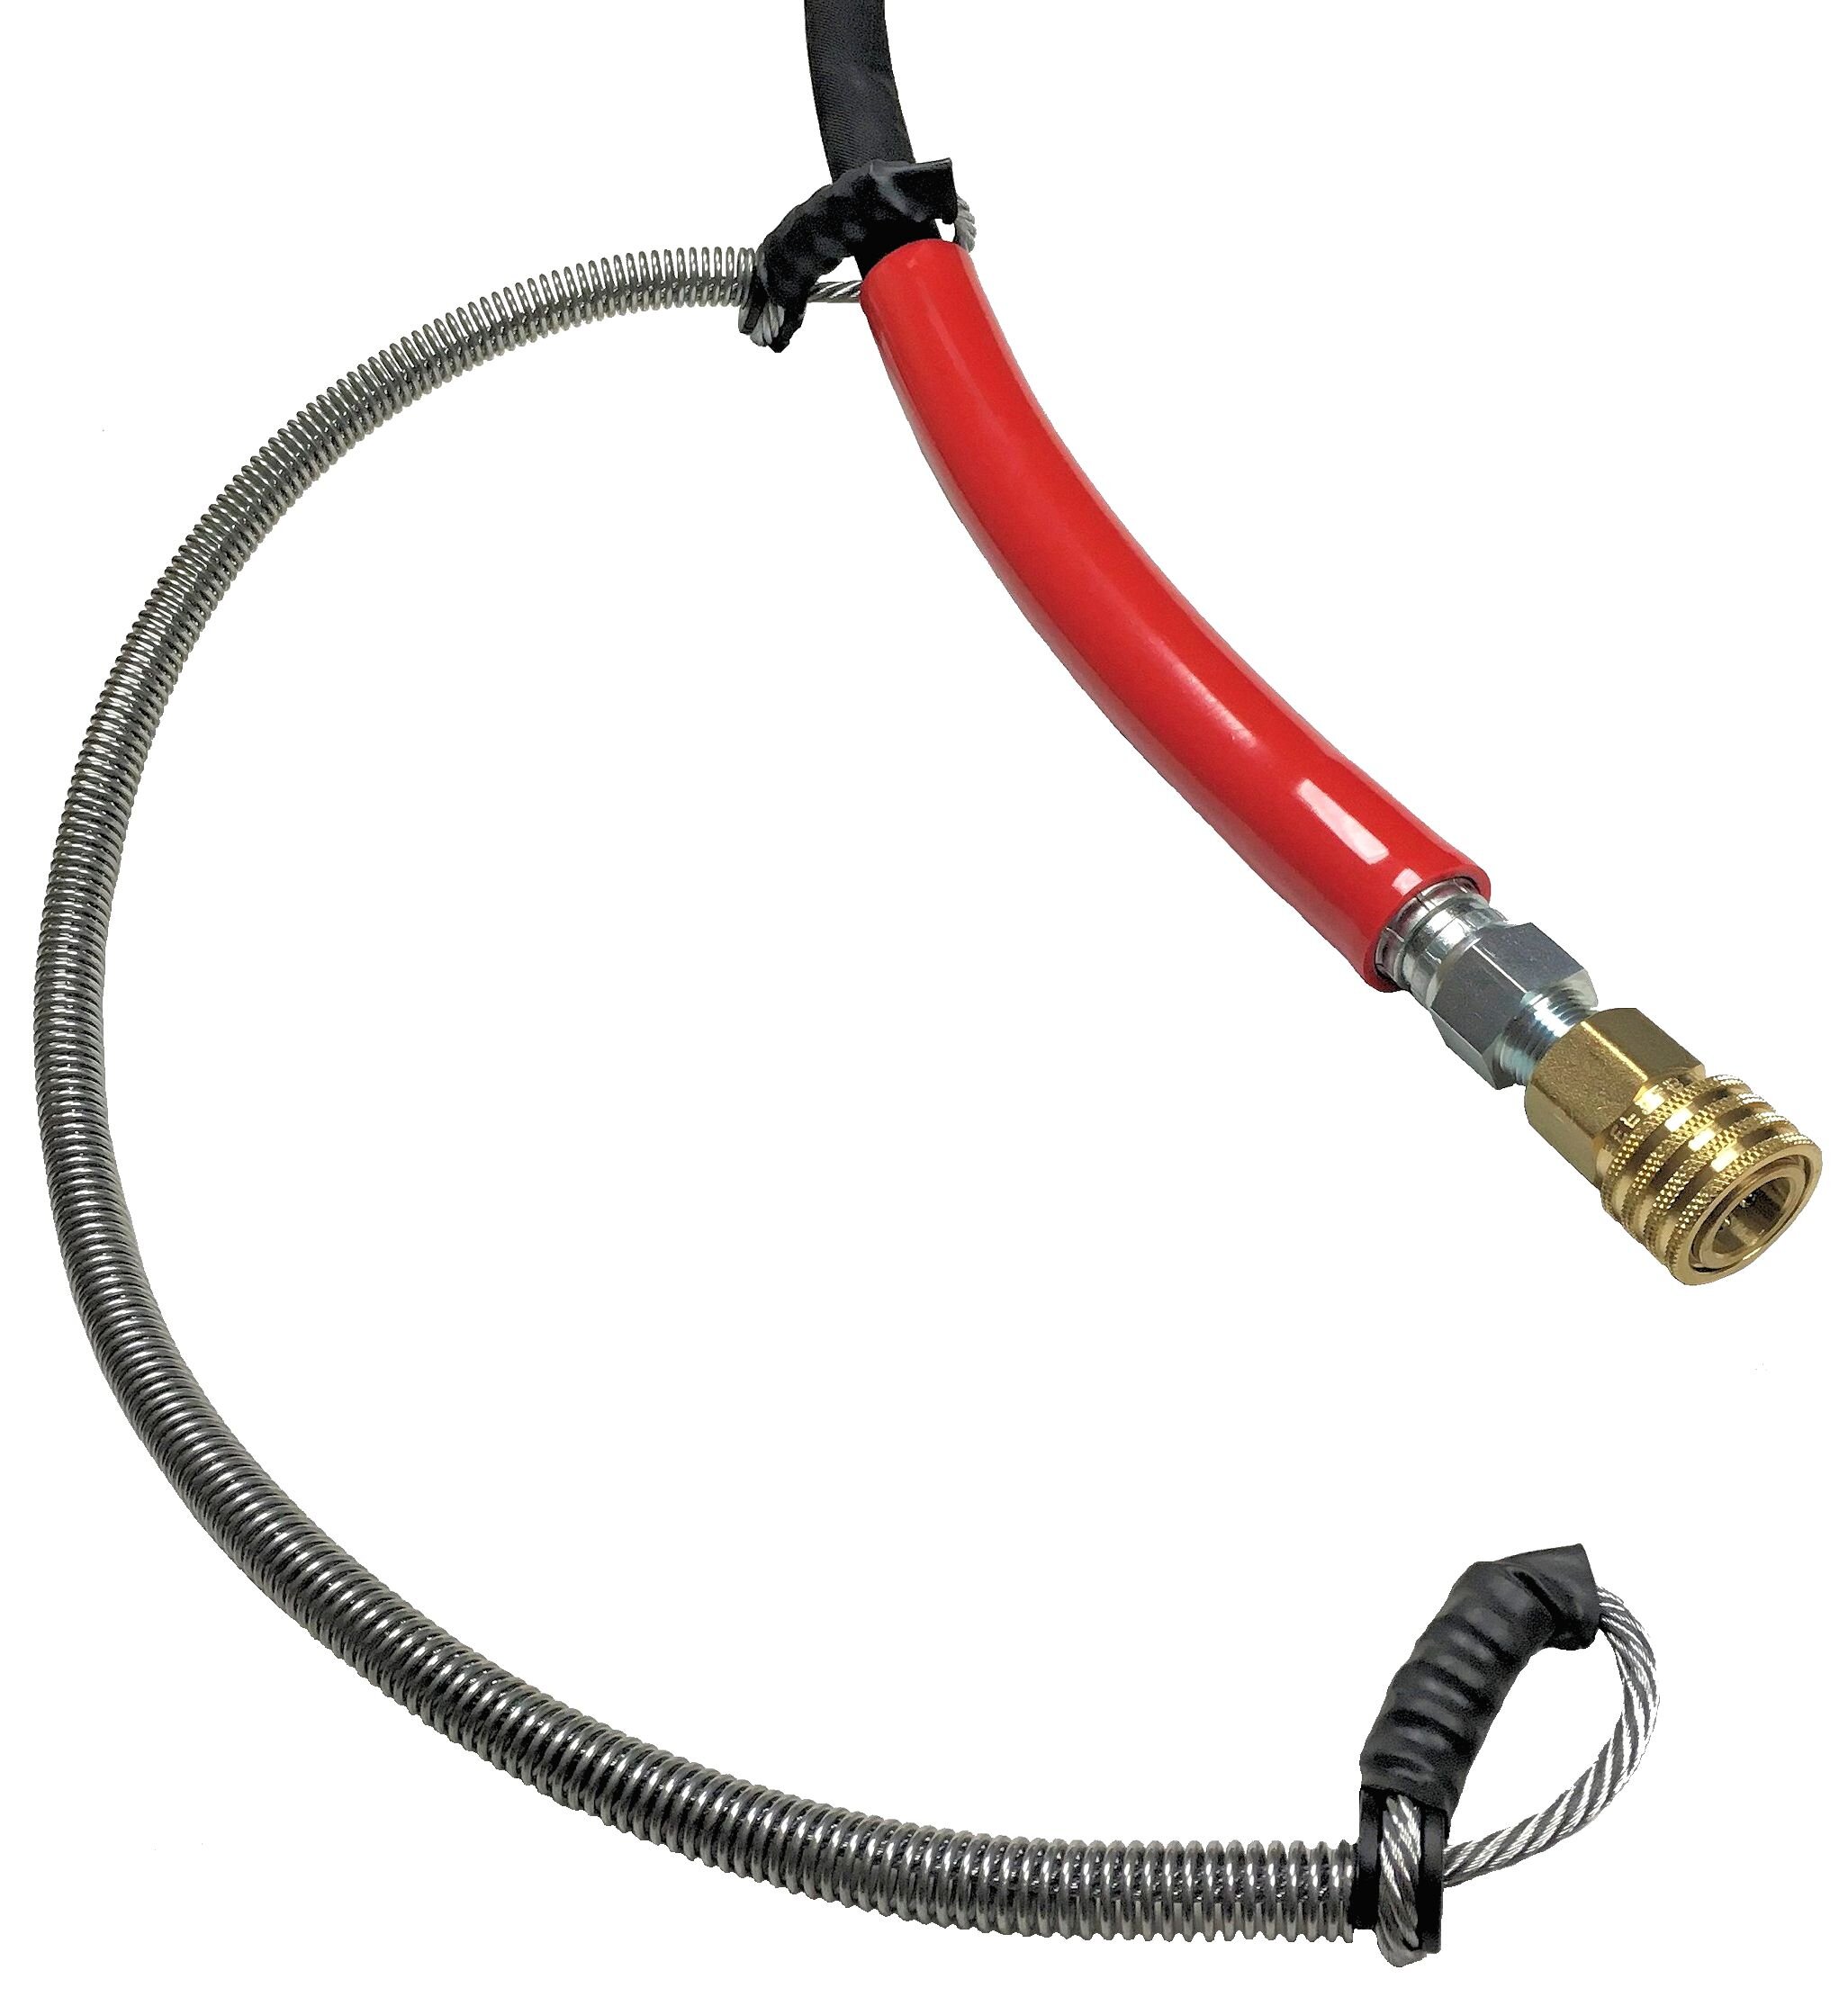 3/4" X 6' Air Hose Whip w/Lubricator & Chicago Coupling on Each End 